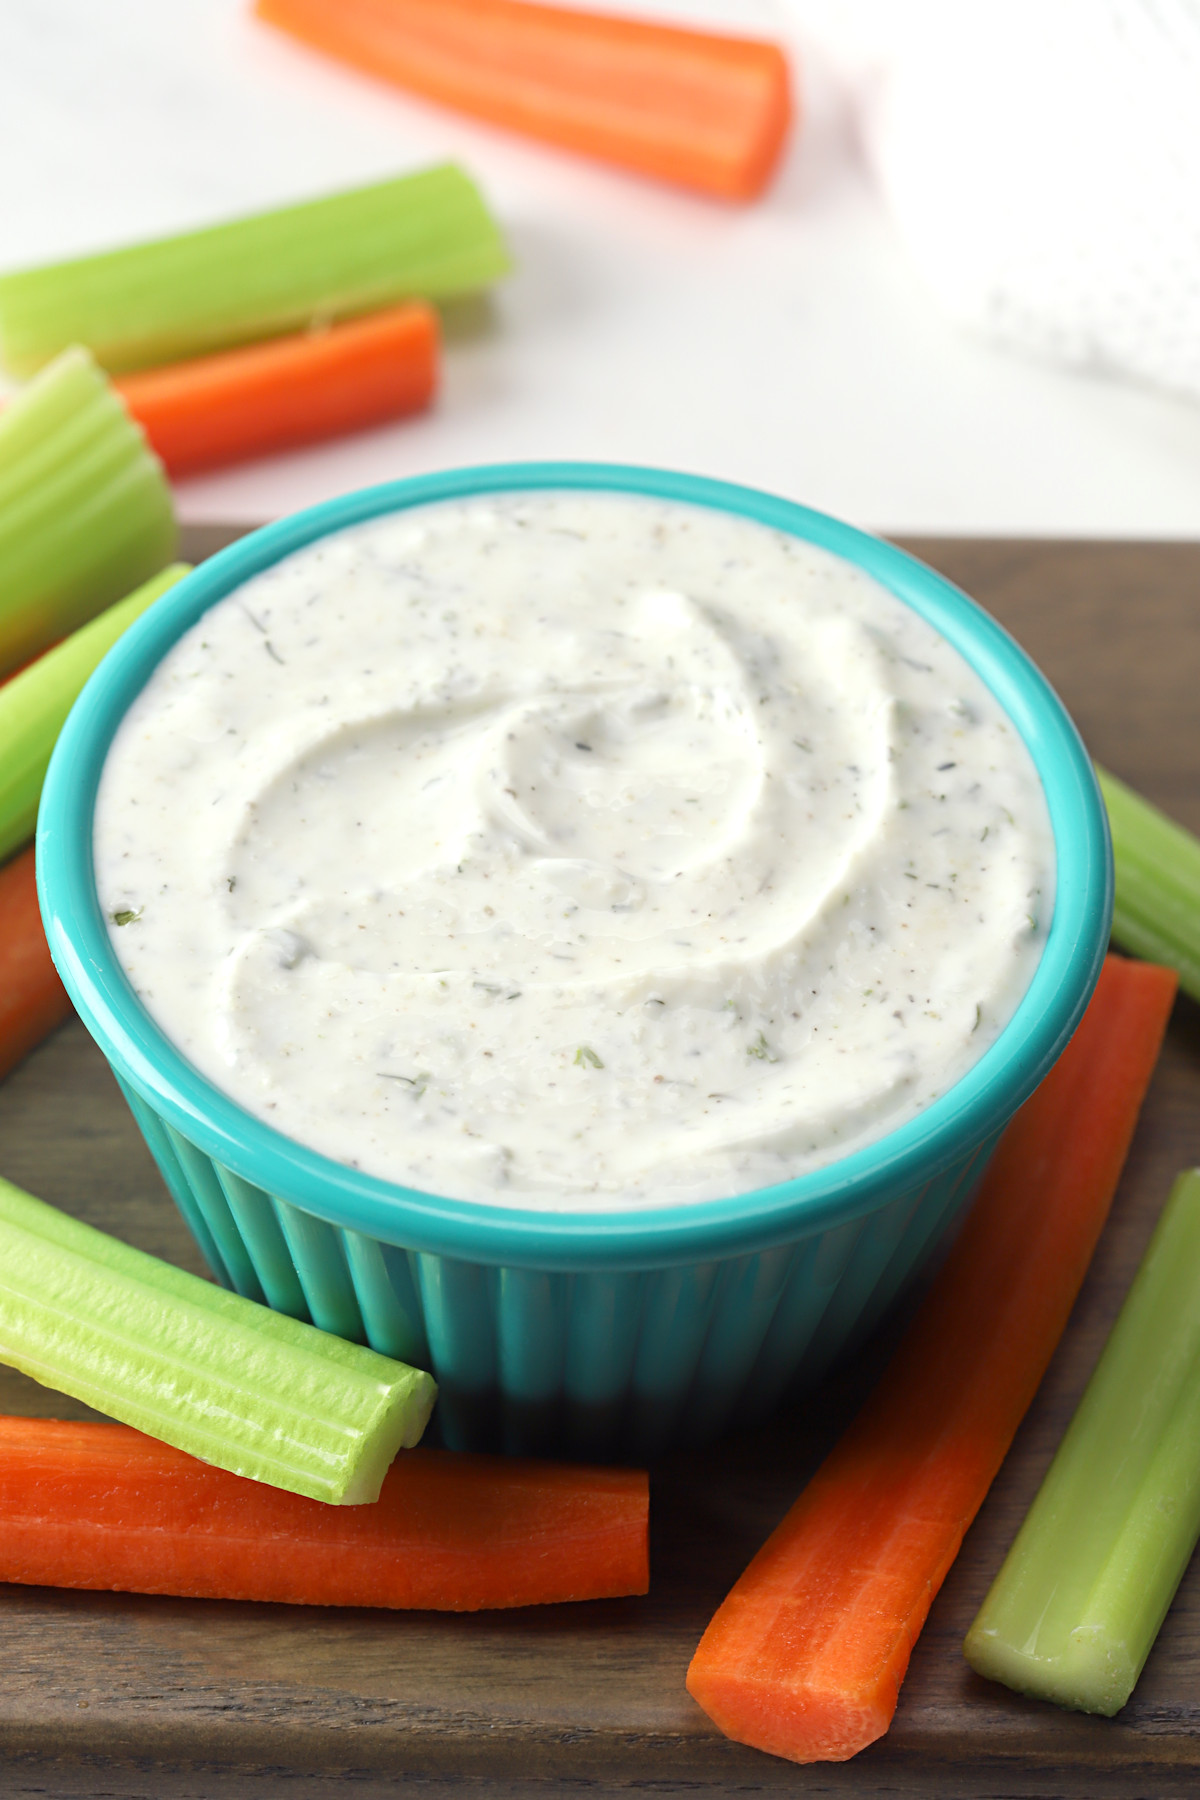 Ranch dip in a teal serving dish.